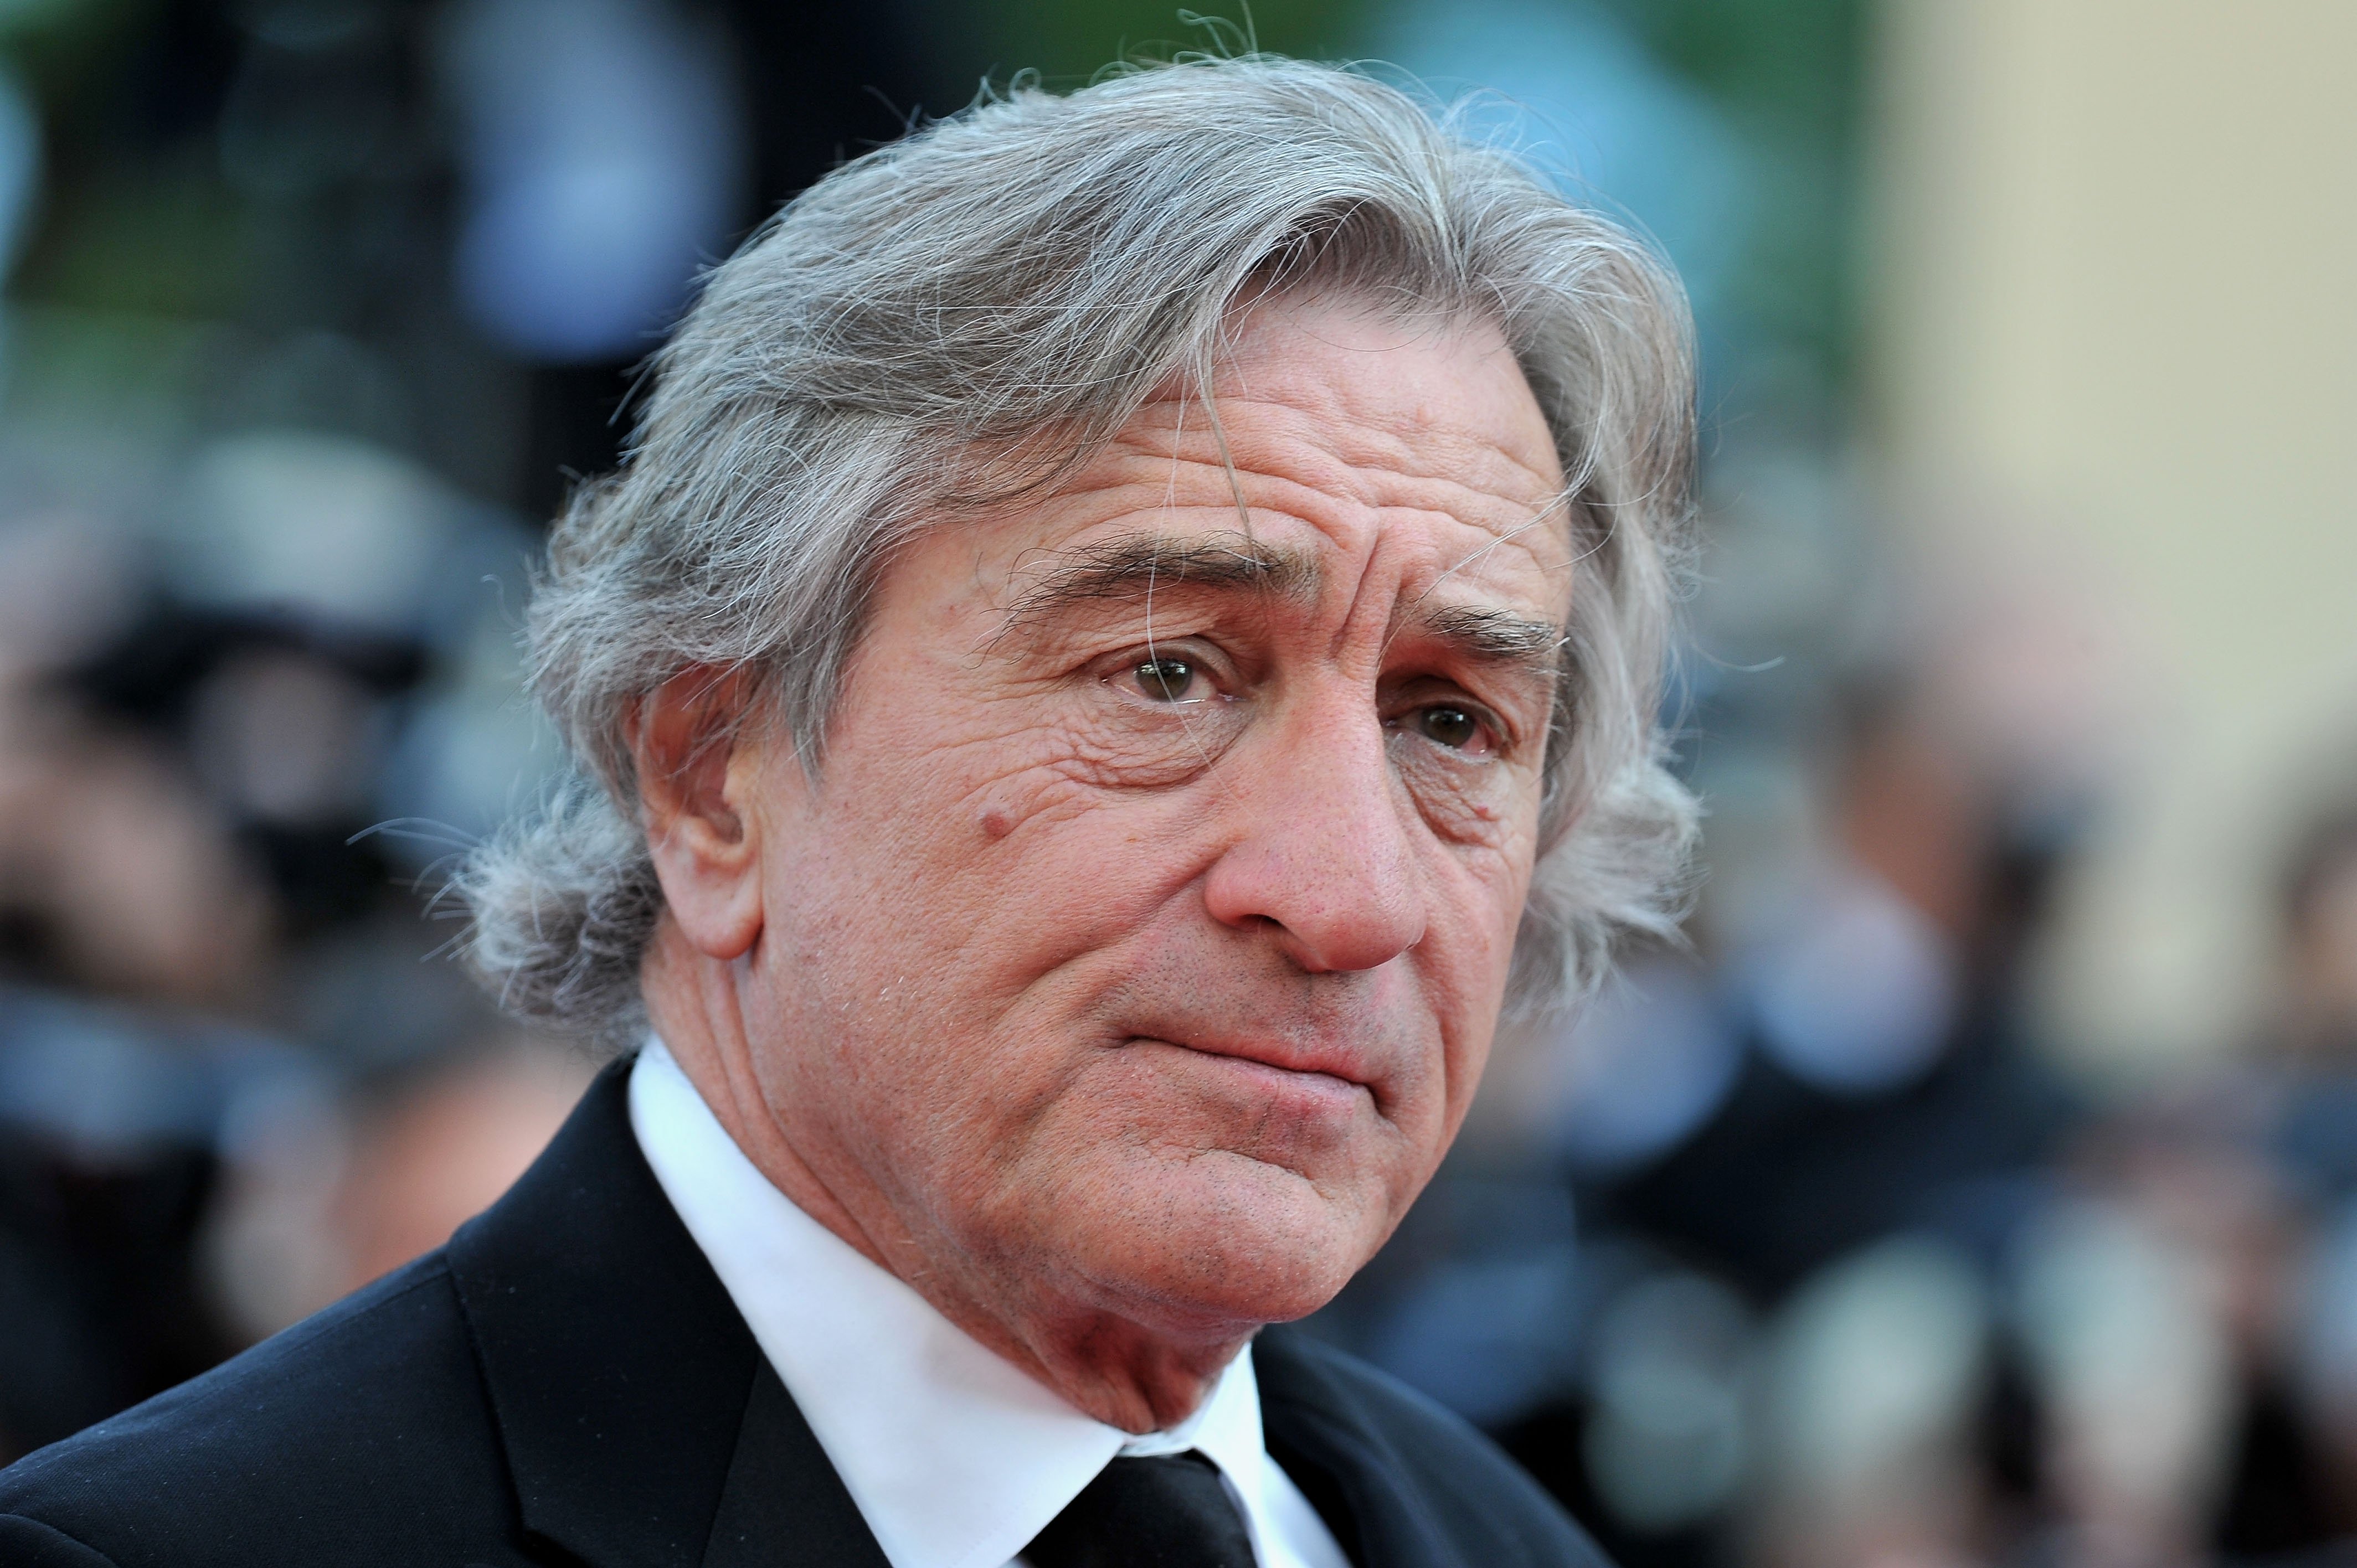 Robert De Niro attends the "Once Upon A Time" Premiere during 65th Annual Cannes Film Festival during at Palais des Festivals on May 18, 2012 in Cannes, France. | Photo: Getty Images